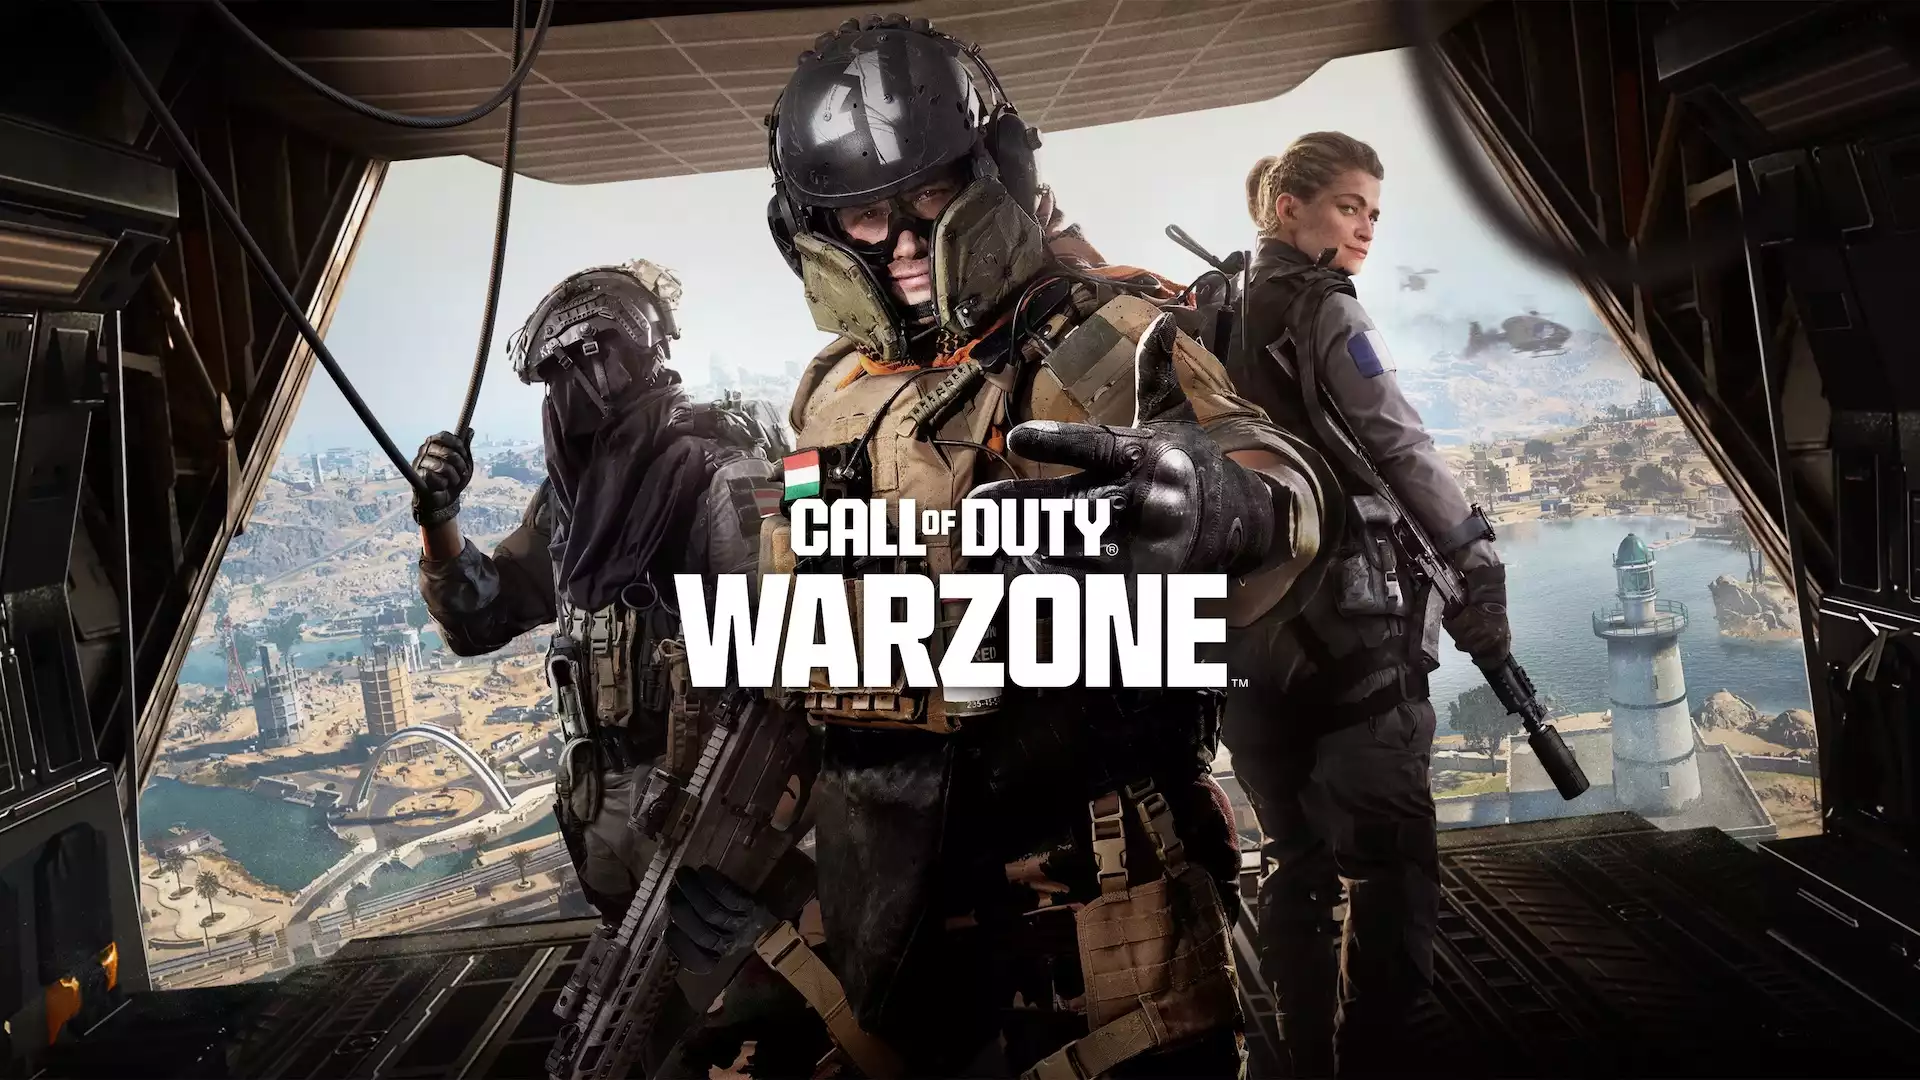 Do you need Xbox Live or PlayStation Plus to play Warzone?